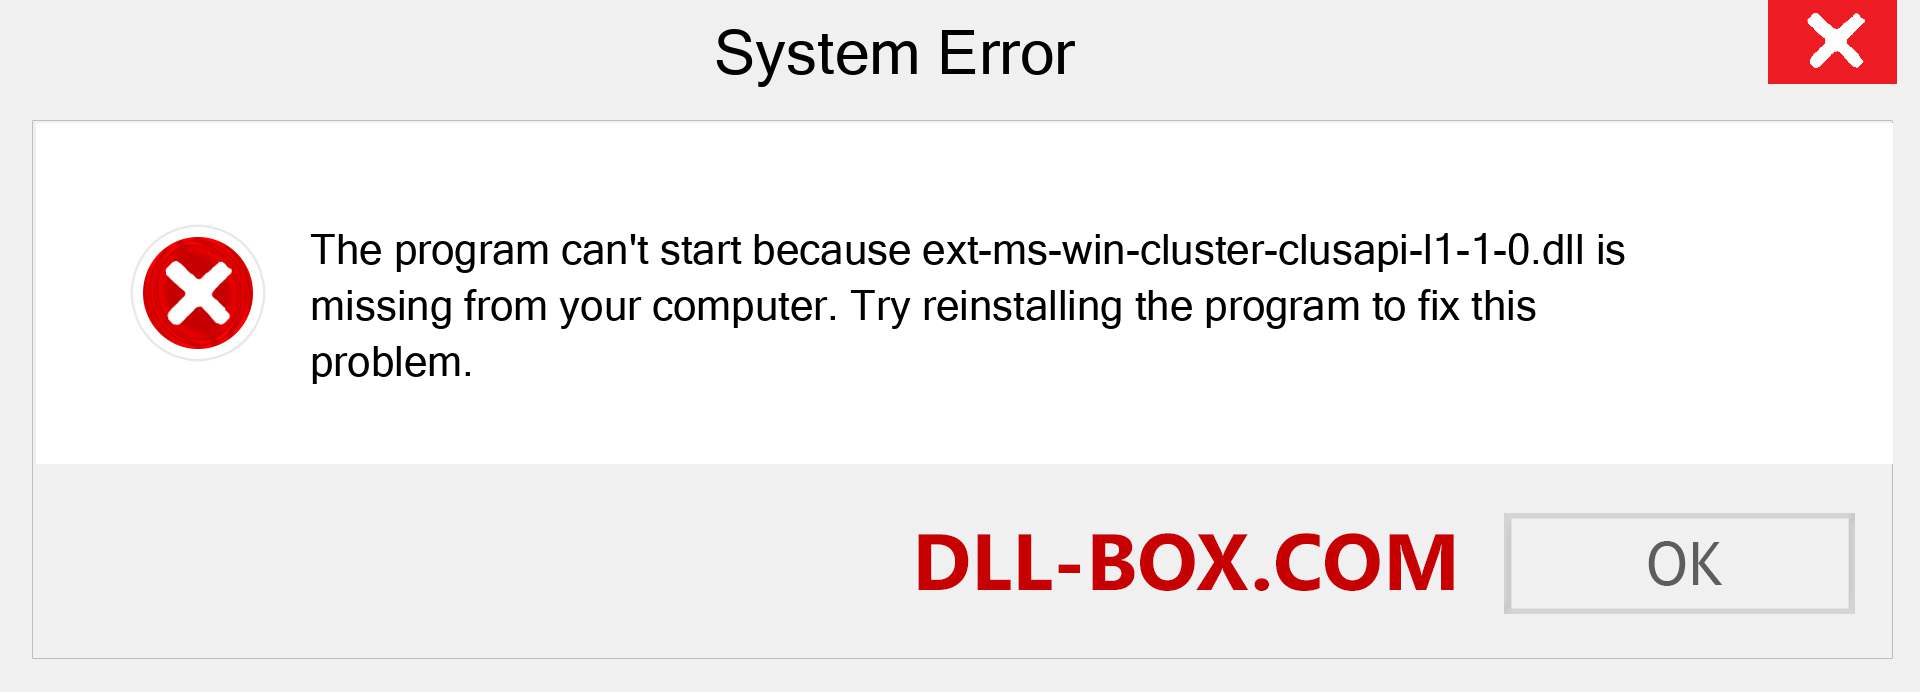  ext-ms-win-cluster-clusapi-l1-1-0.dll file is missing?. Download for Windows 7, 8, 10 - Fix  ext-ms-win-cluster-clusapi-l1-1-0 dll Missing Error on Windows, photos, images